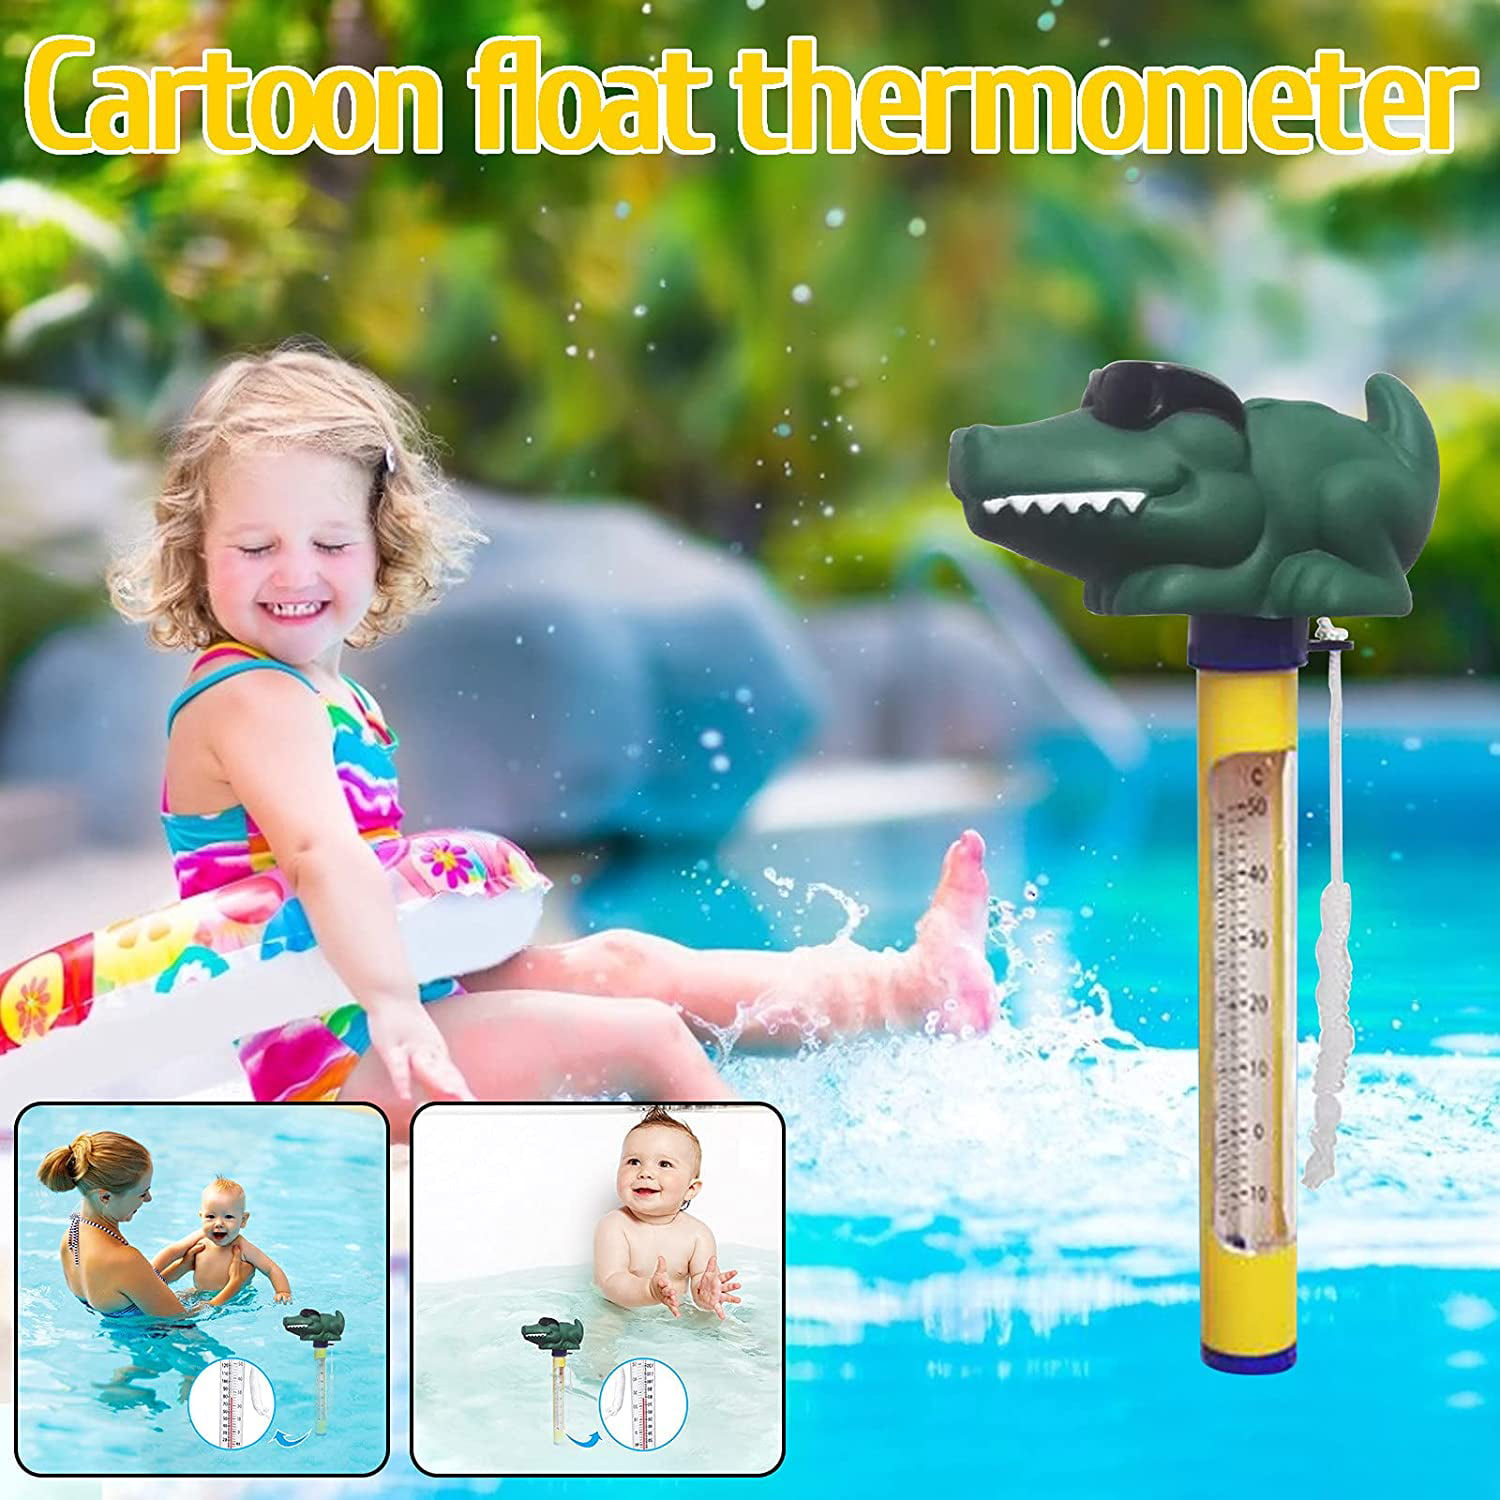 Cute Baby Water Floating High-Precision Easy to Read Thermometer Crocodile Housolution Water Thermometer Plastic Cartoon Float Kids Bathtub Pool Water Toy 